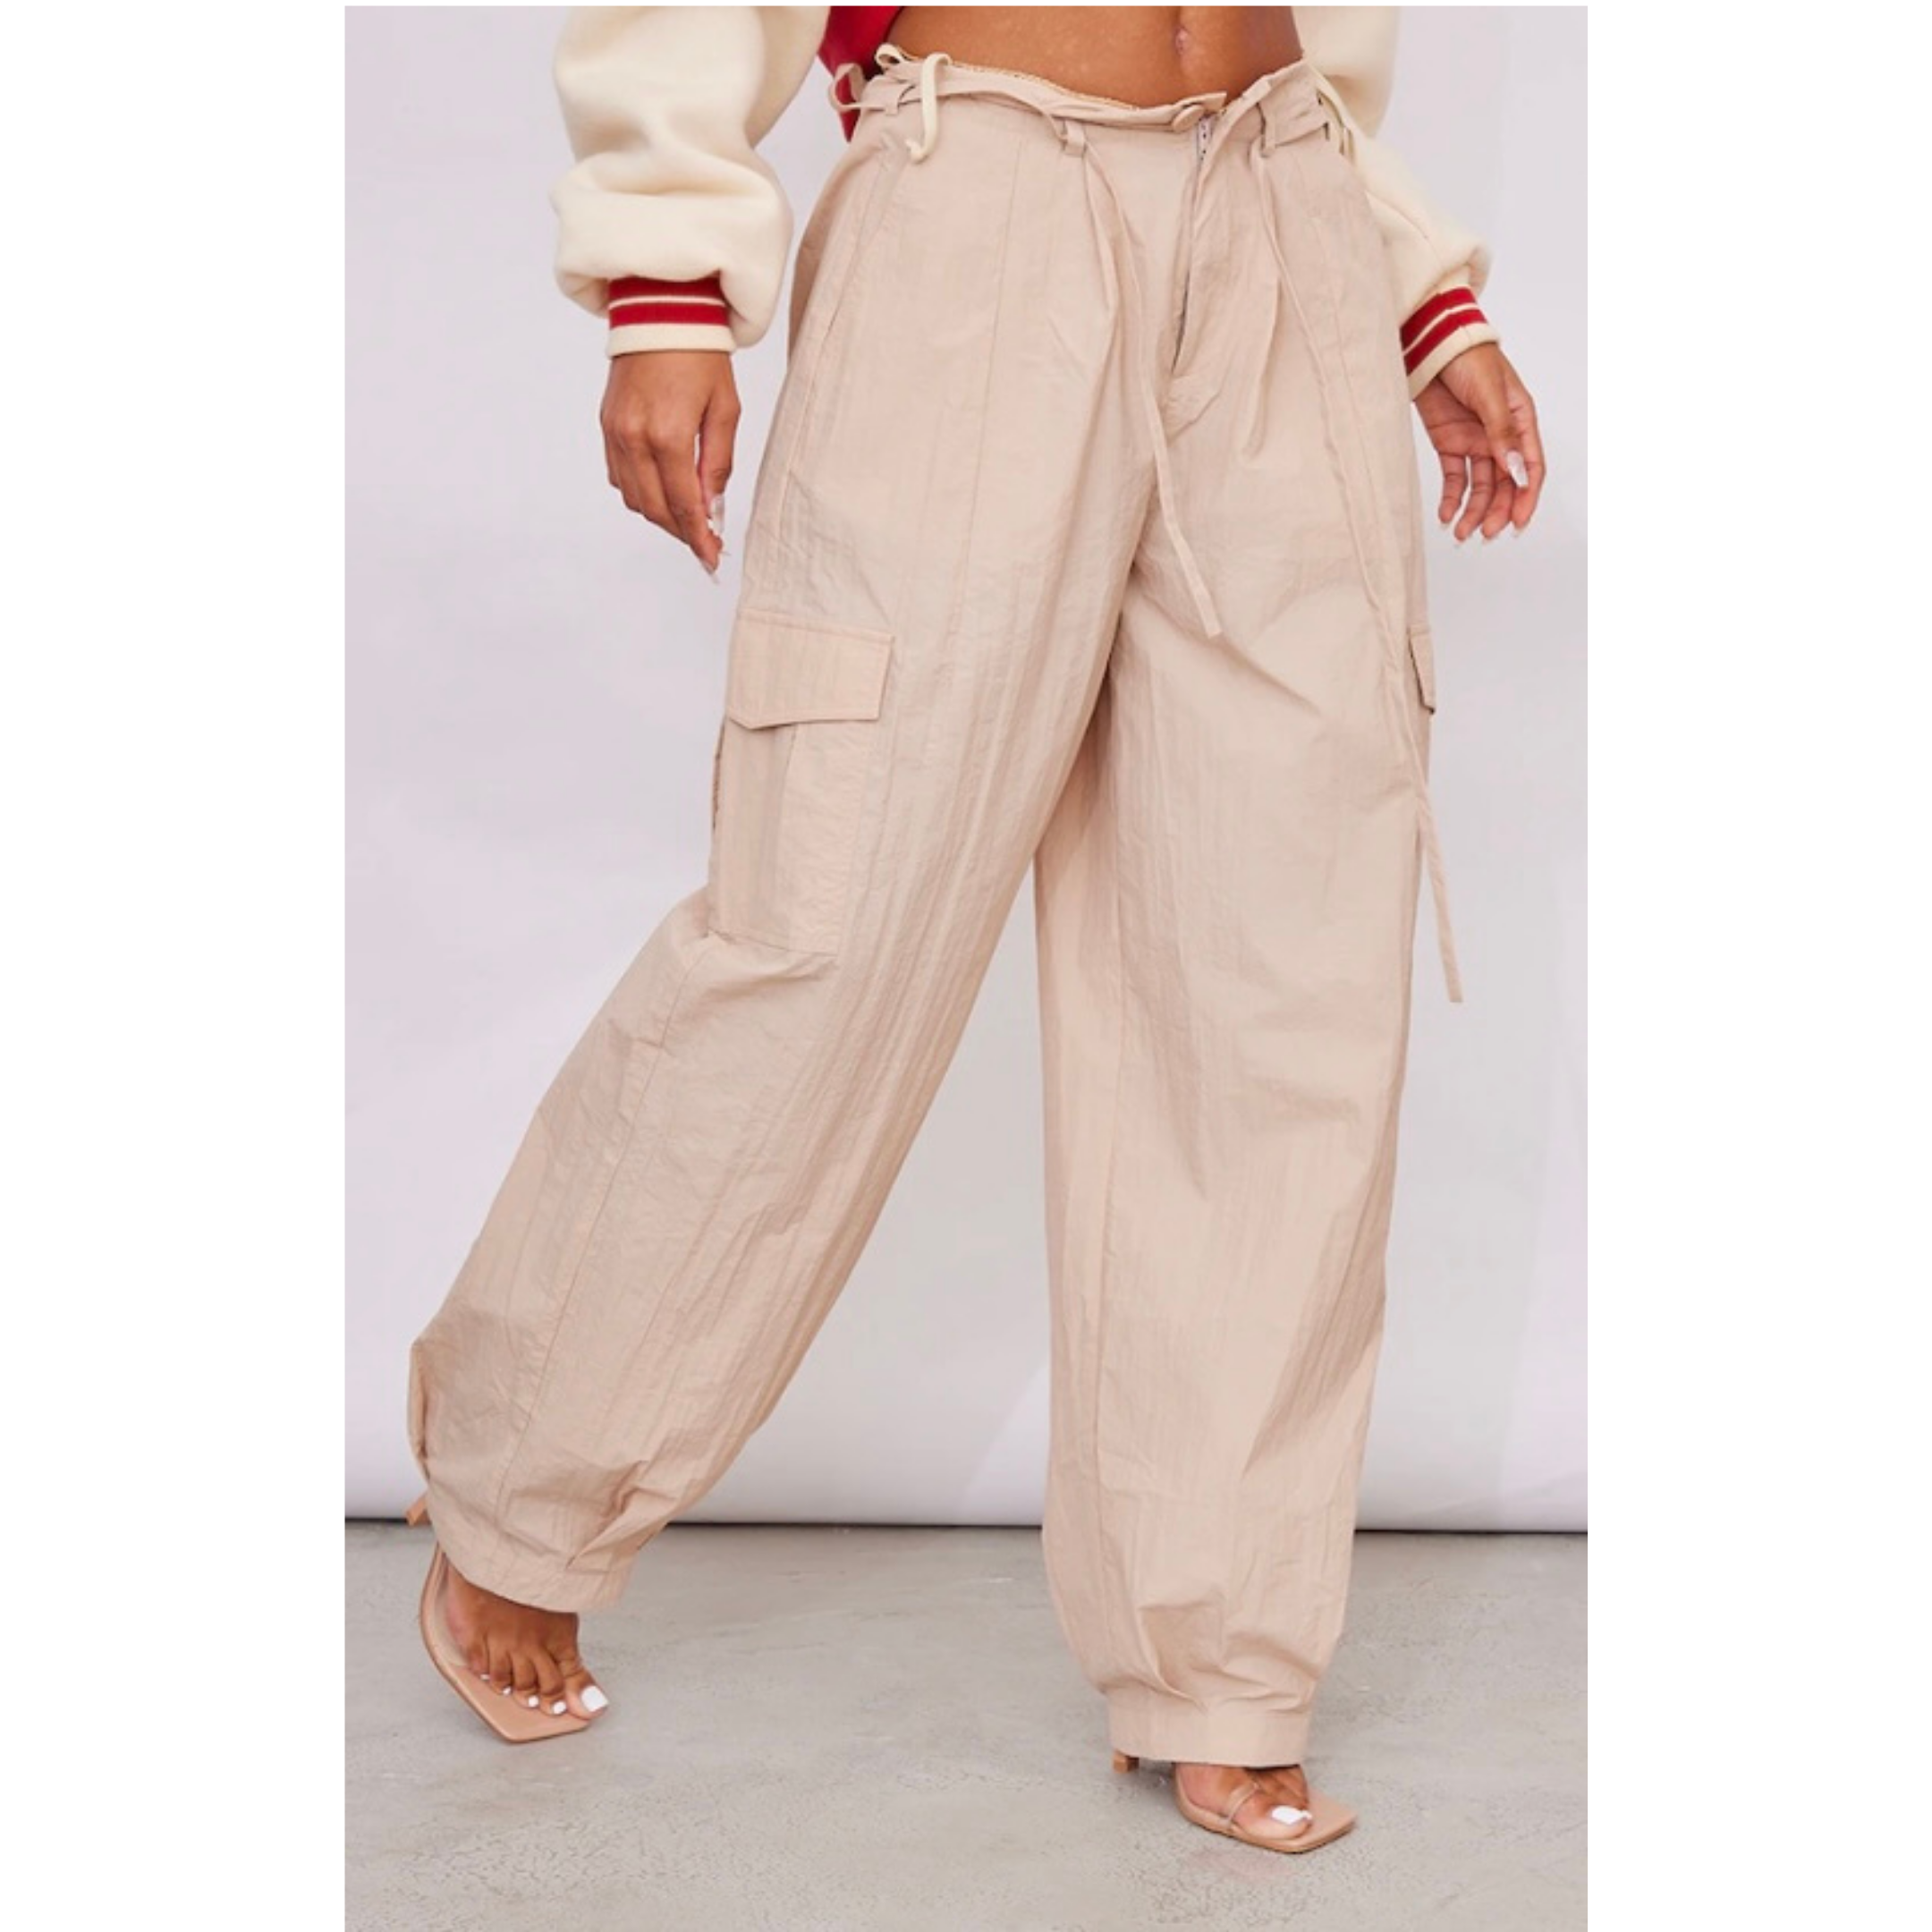 Parachute Pants Are The Cozy Cute Pants Trend Taking Over